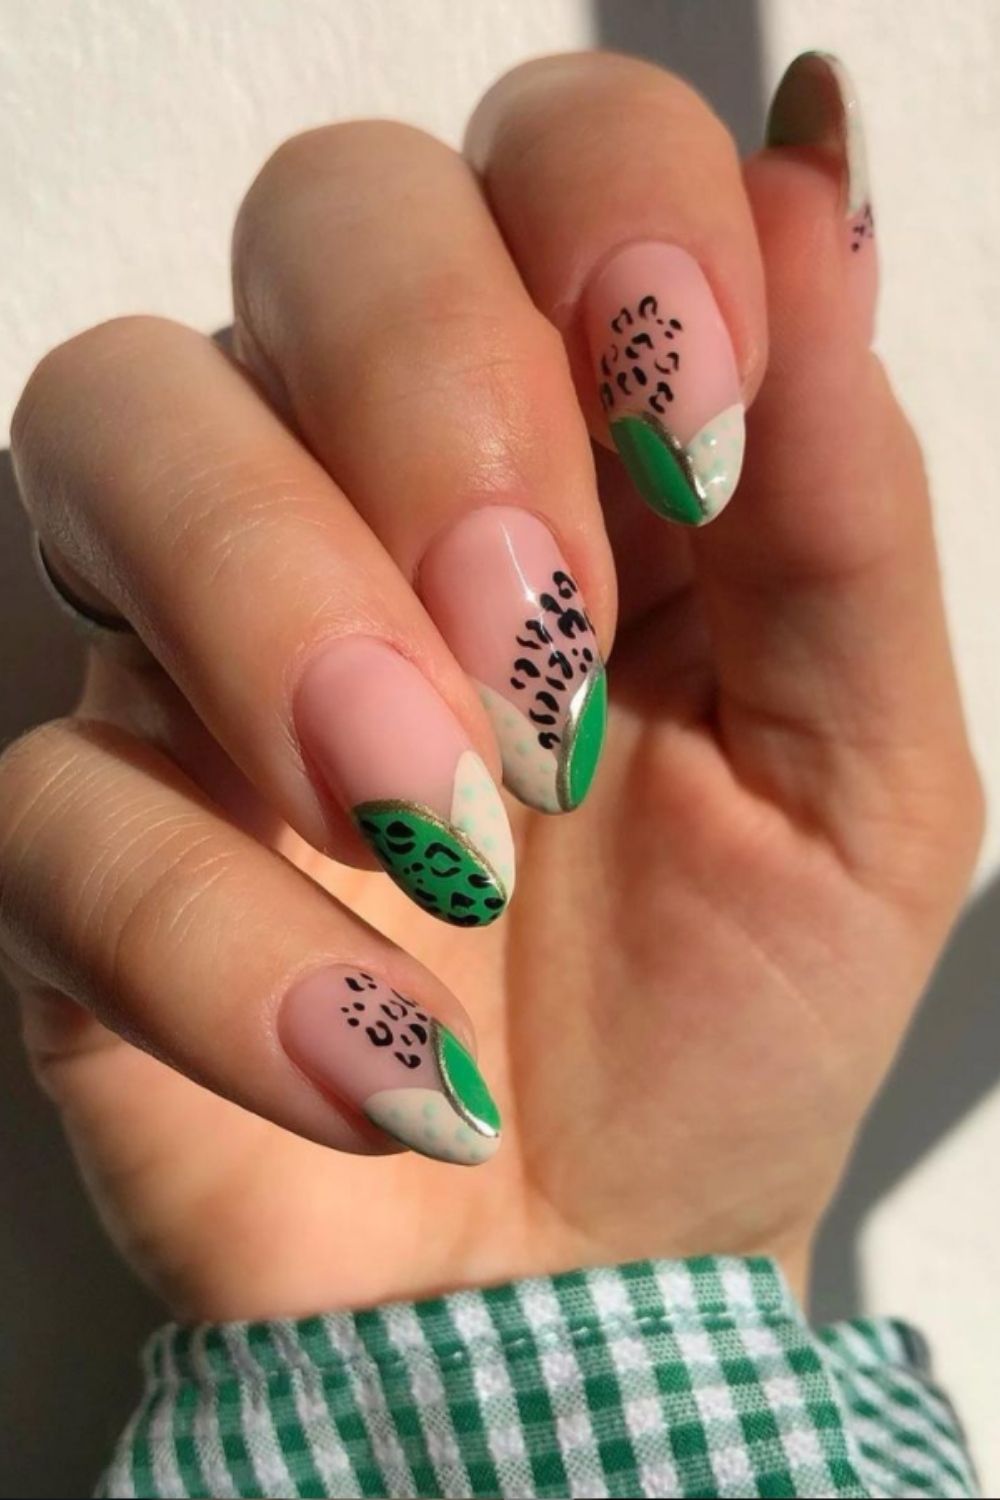 Green and white French tip almond nails